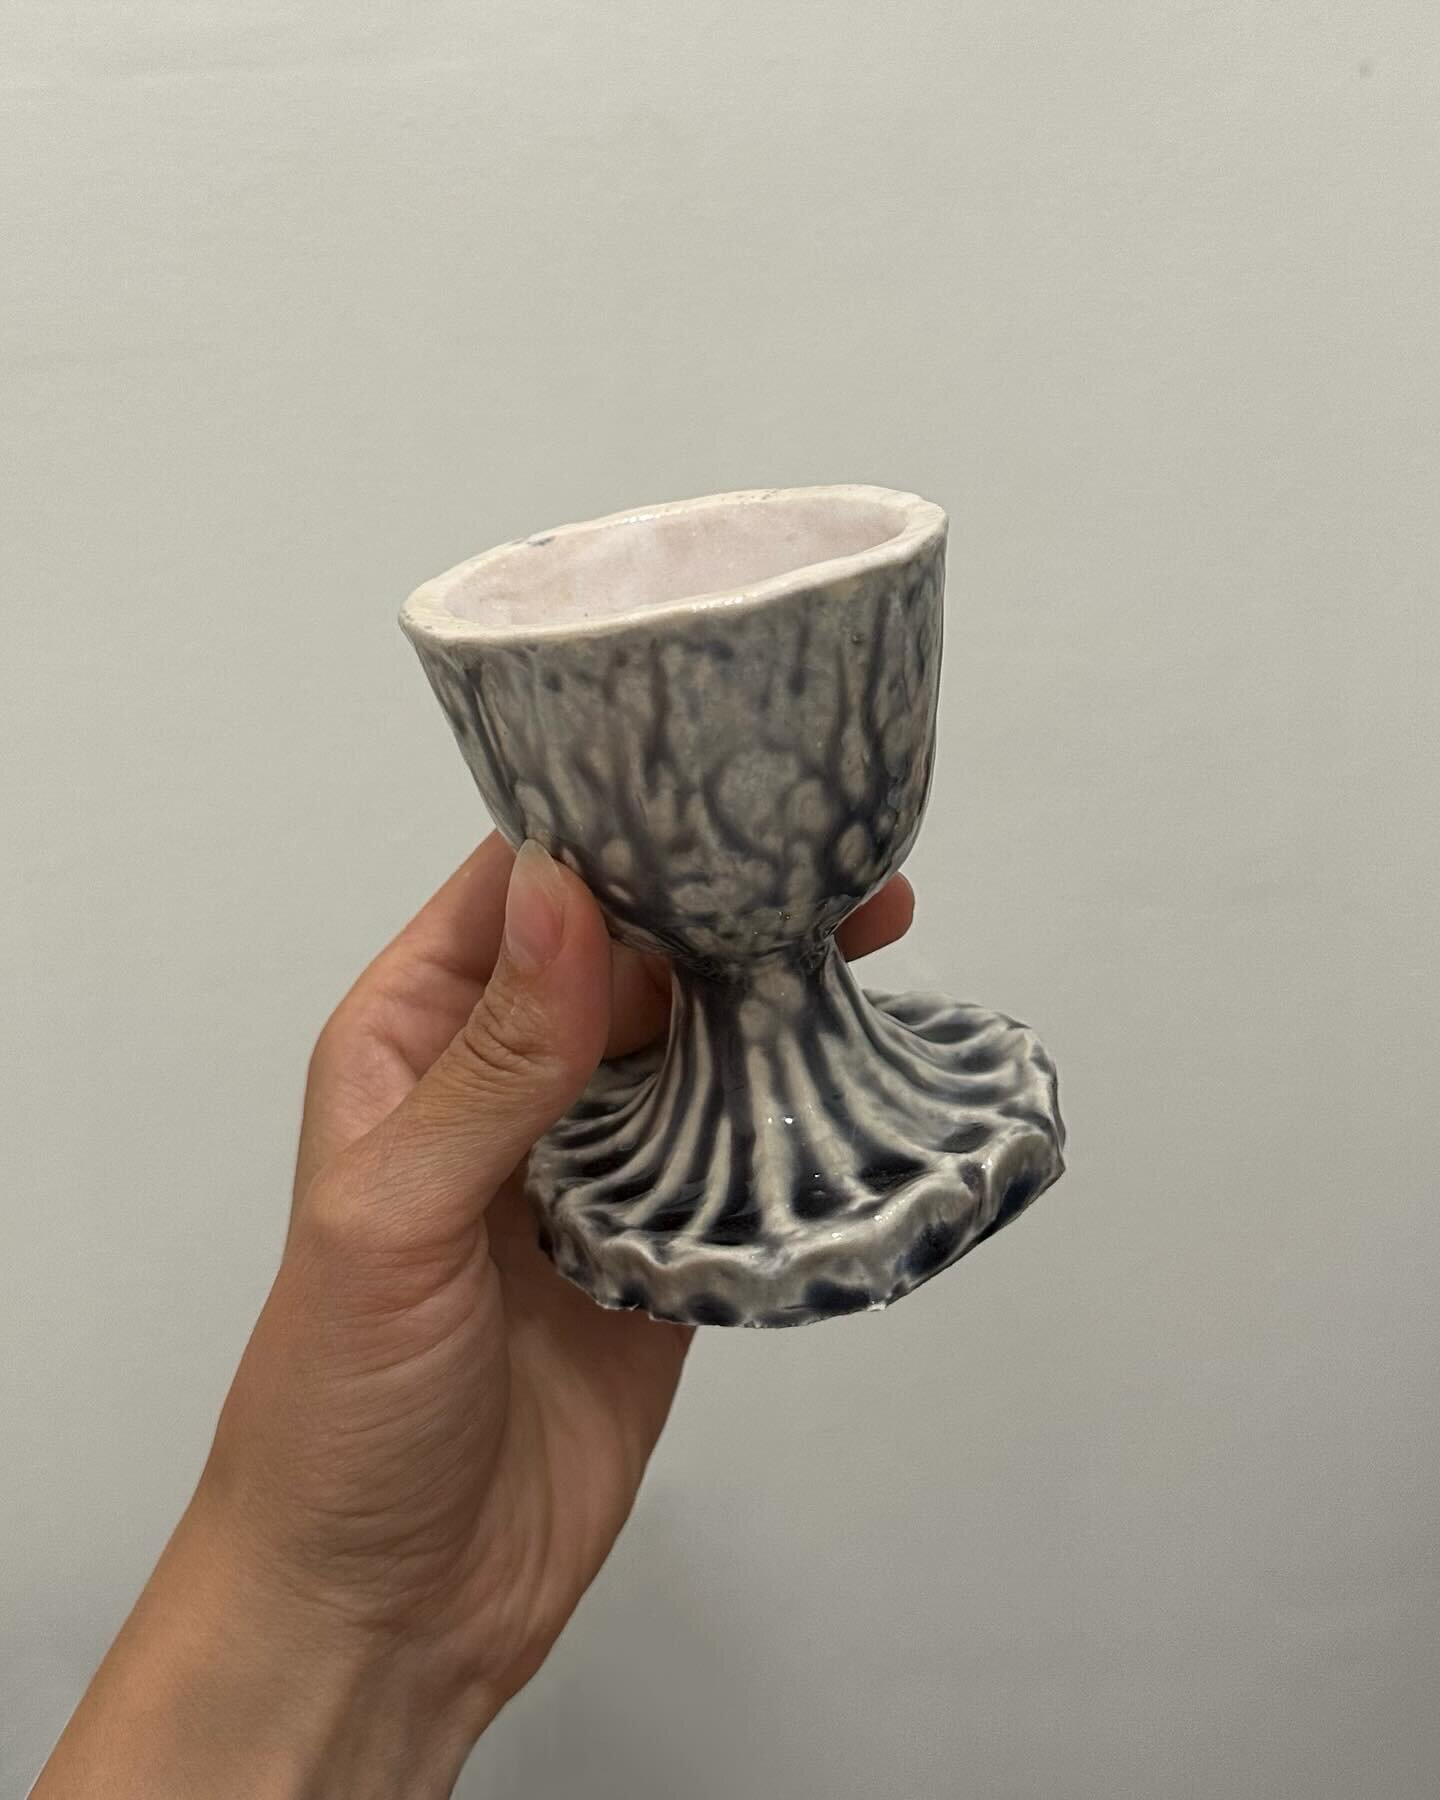 for context on where i&rsquo;m at with teaching myself ceramics: this was supposed to be black